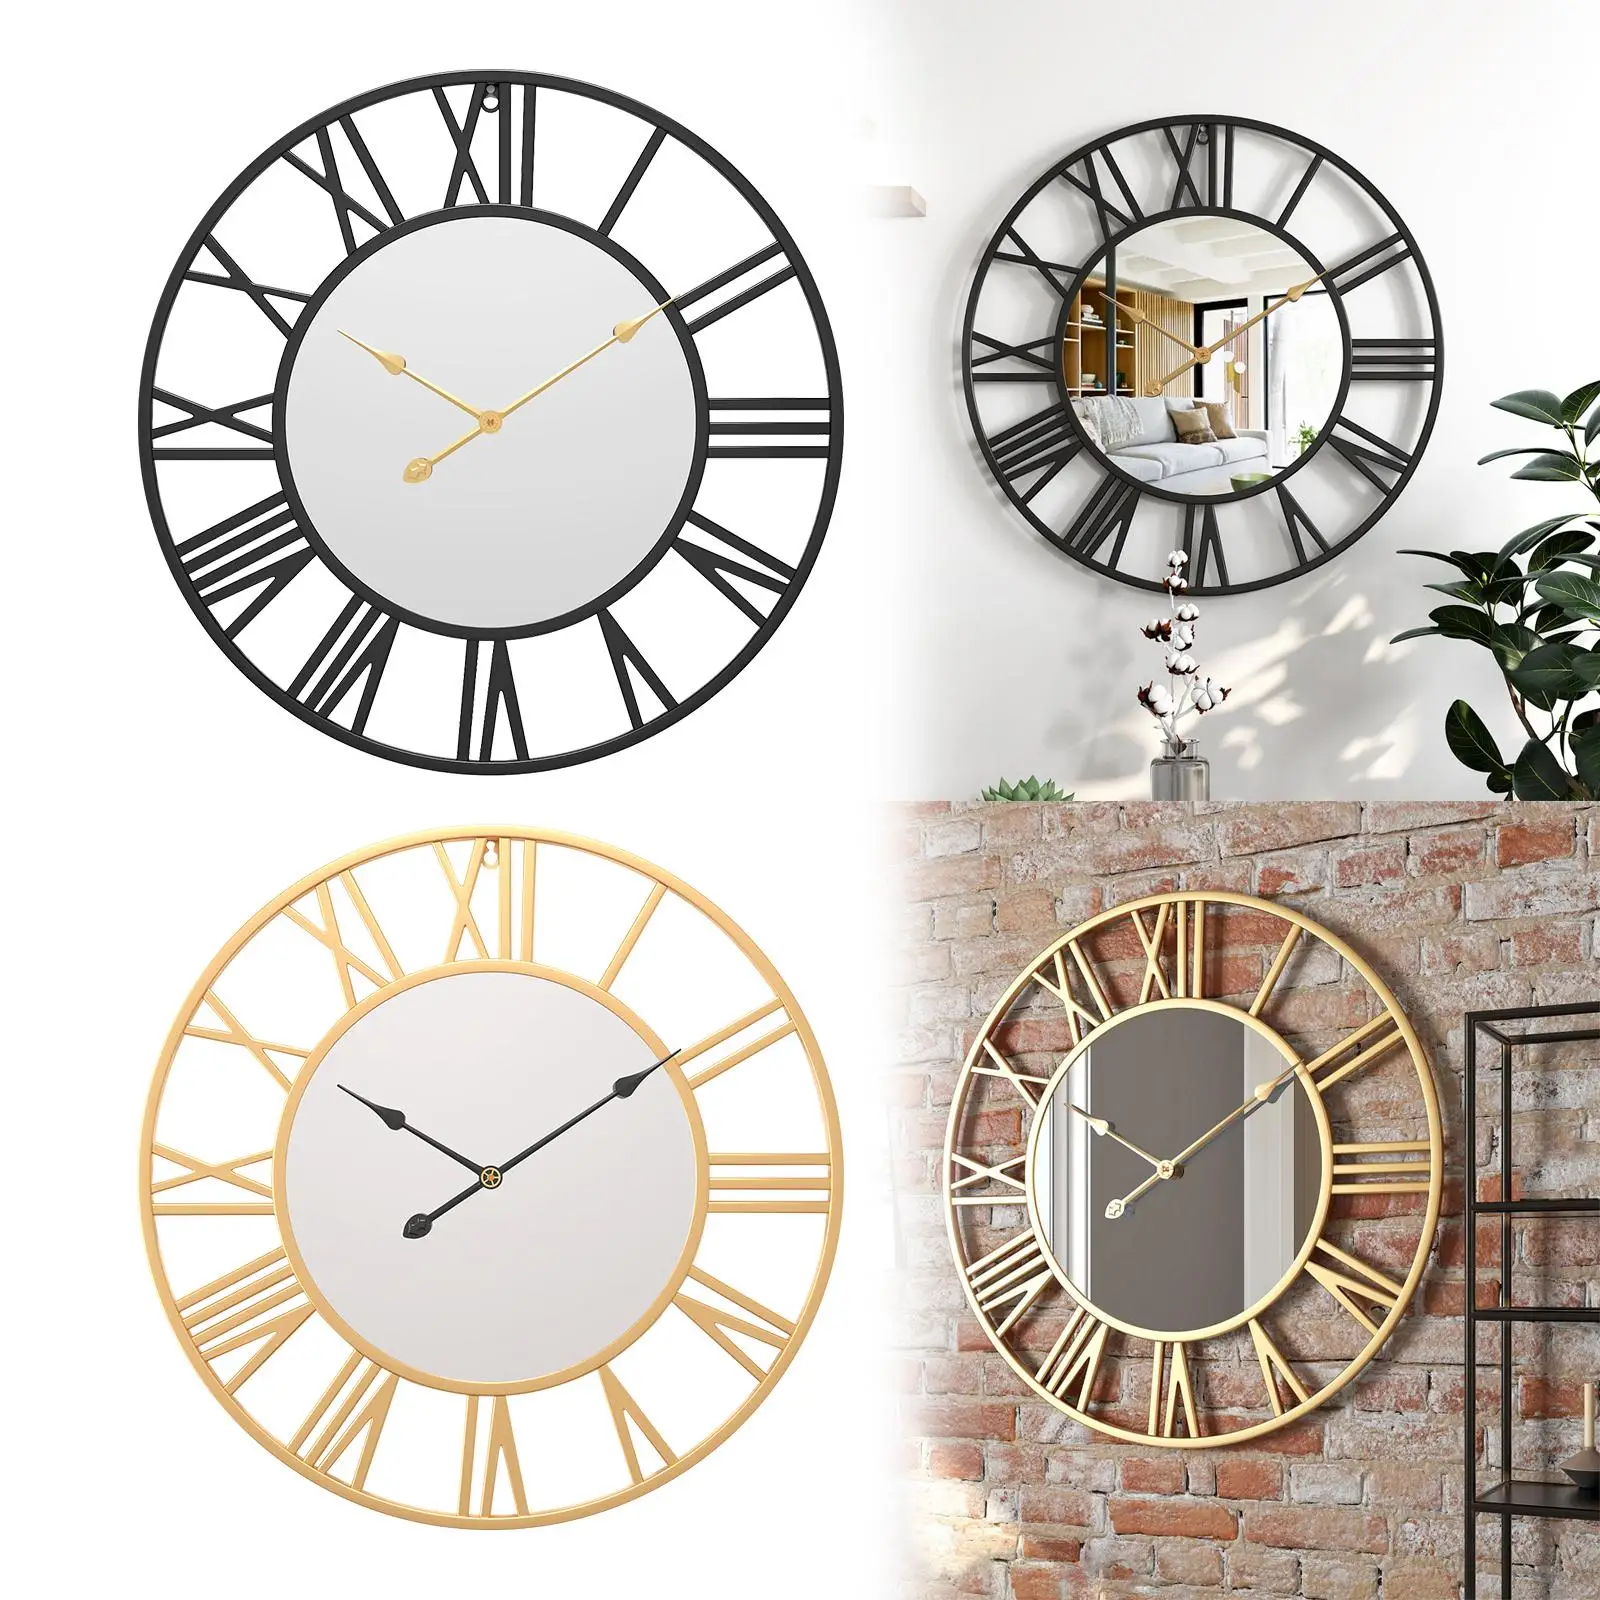 Silent Hanging Clock Ornament Roman Numerals 12H Display Round for Bedroom Restaurants Cafes Bathroom Adults Kids images - 6